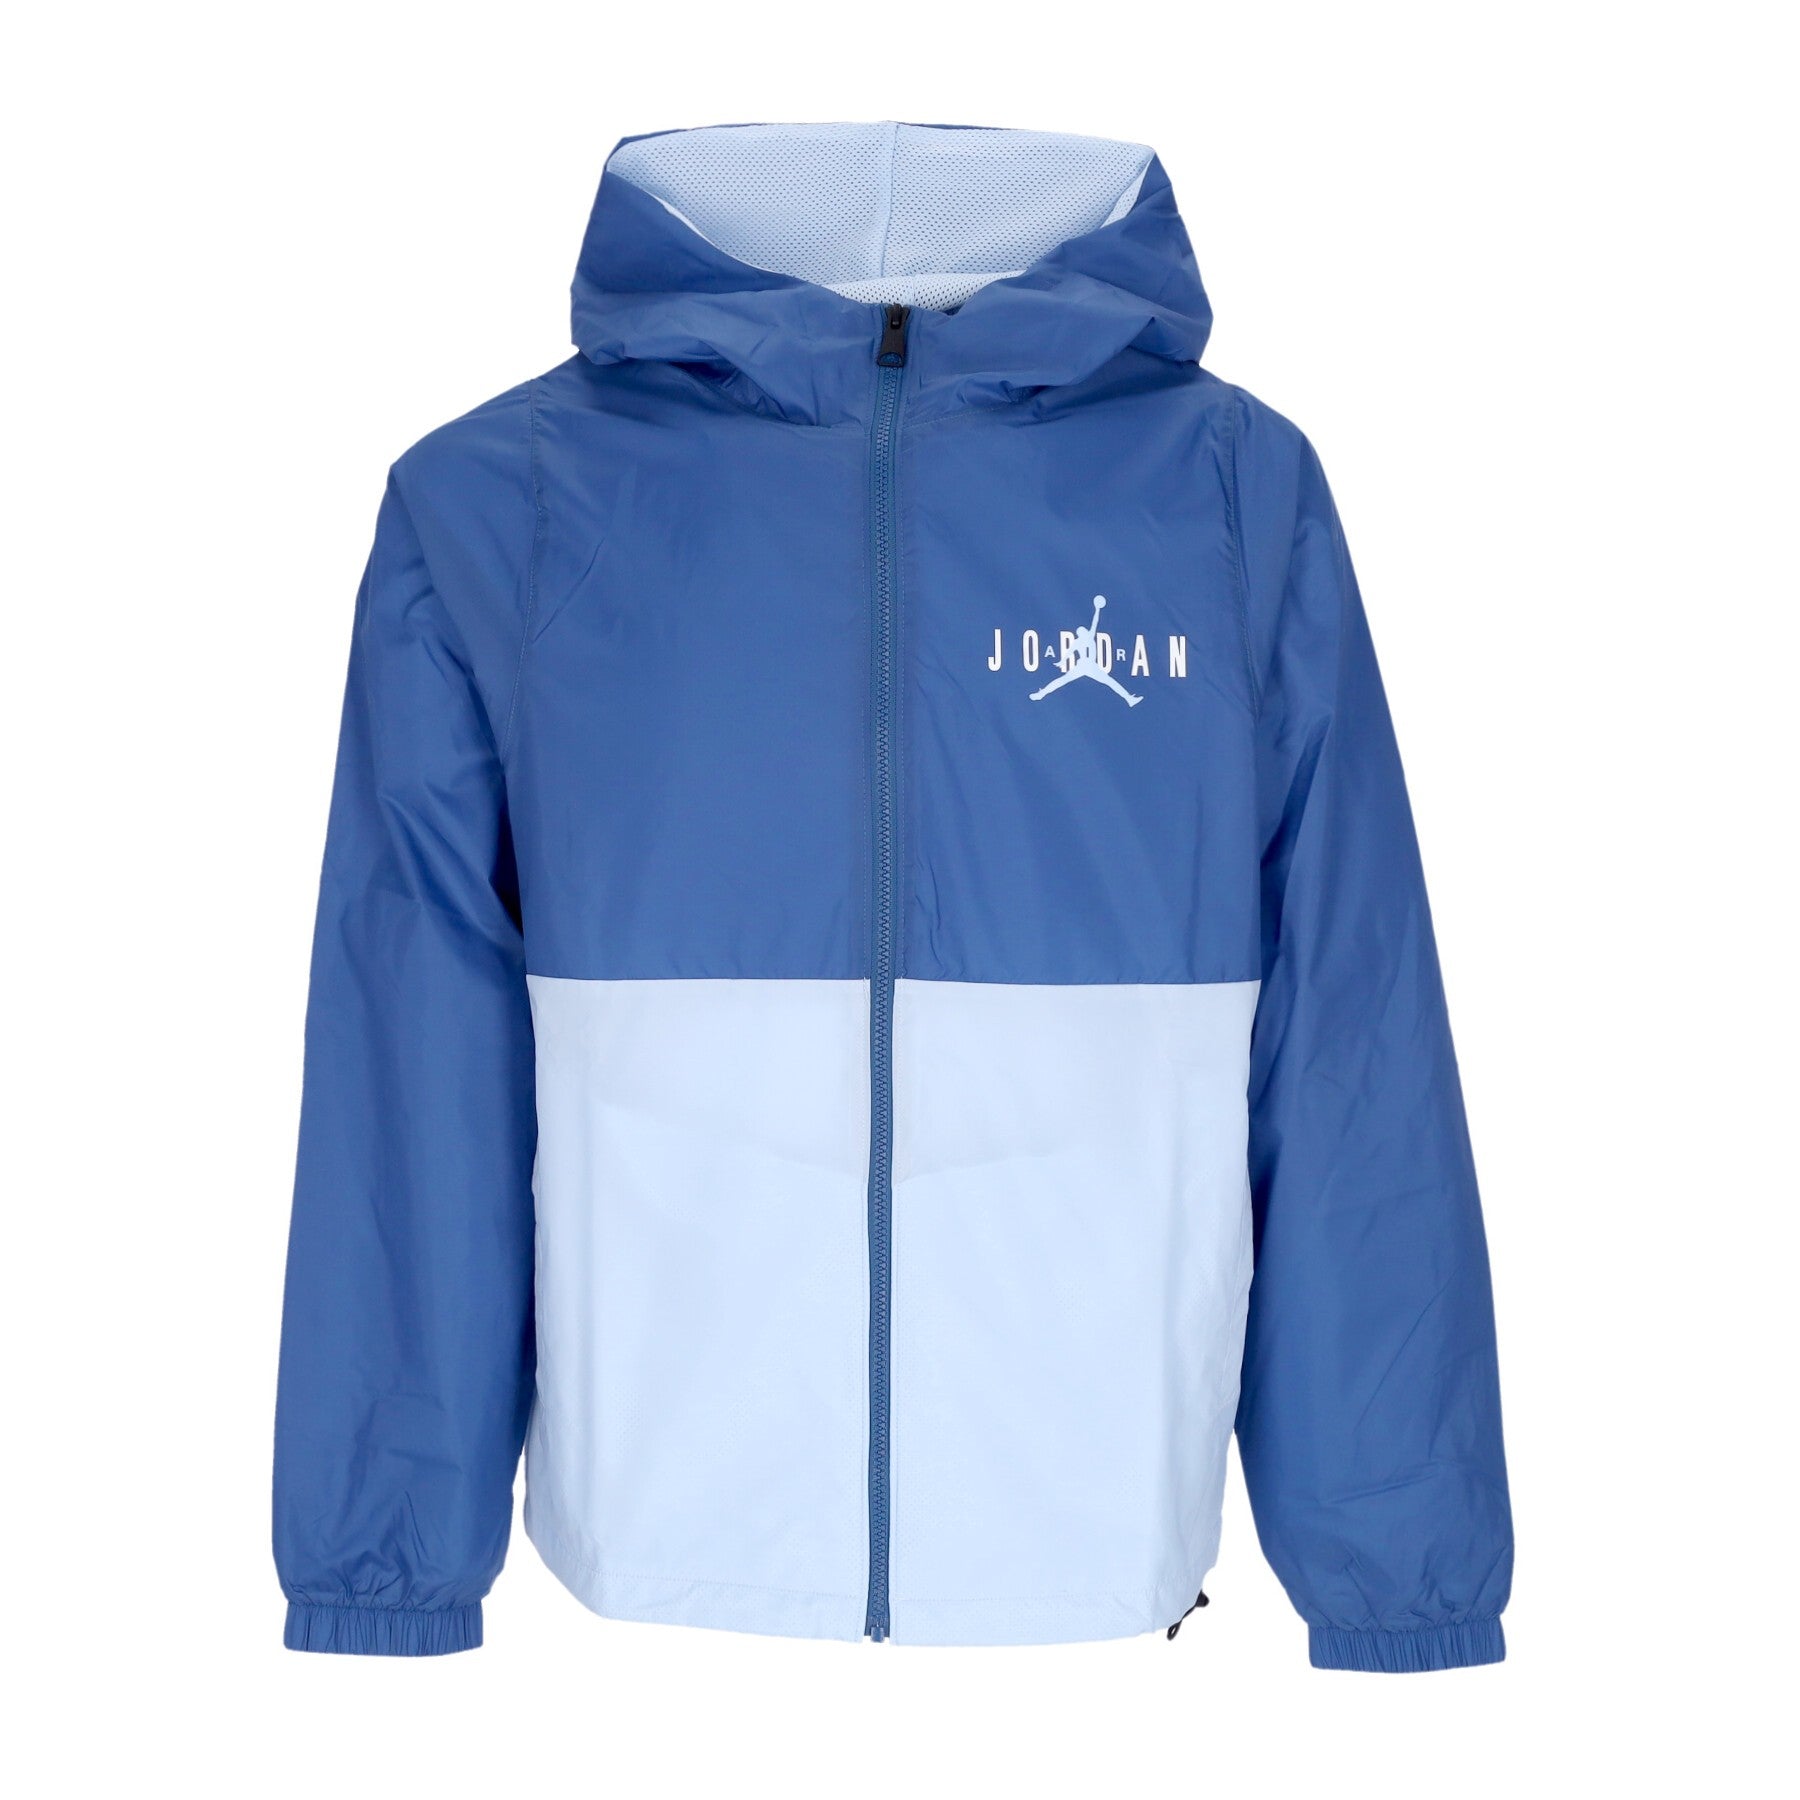 Jordan, Giacca A Vento Uomo Essential Statement Woven Jacket, True Blue/ice Blue/ice Blue